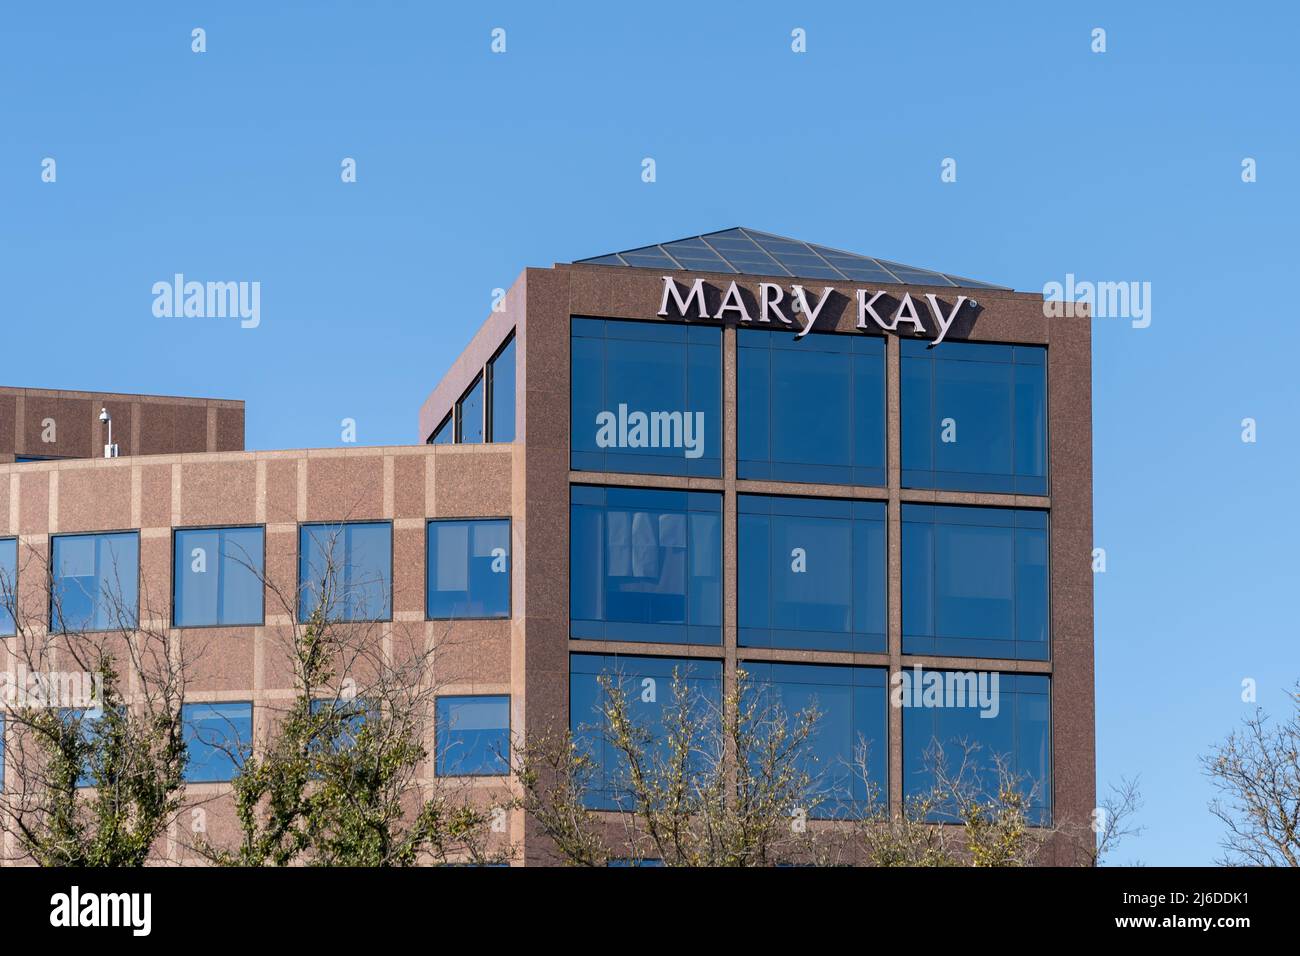 Addison, Texas, USA - March 19, 2022: Mary Kay’s sign on the building at its corporate headquarters in Addison, Texas, USA. Stock Photo